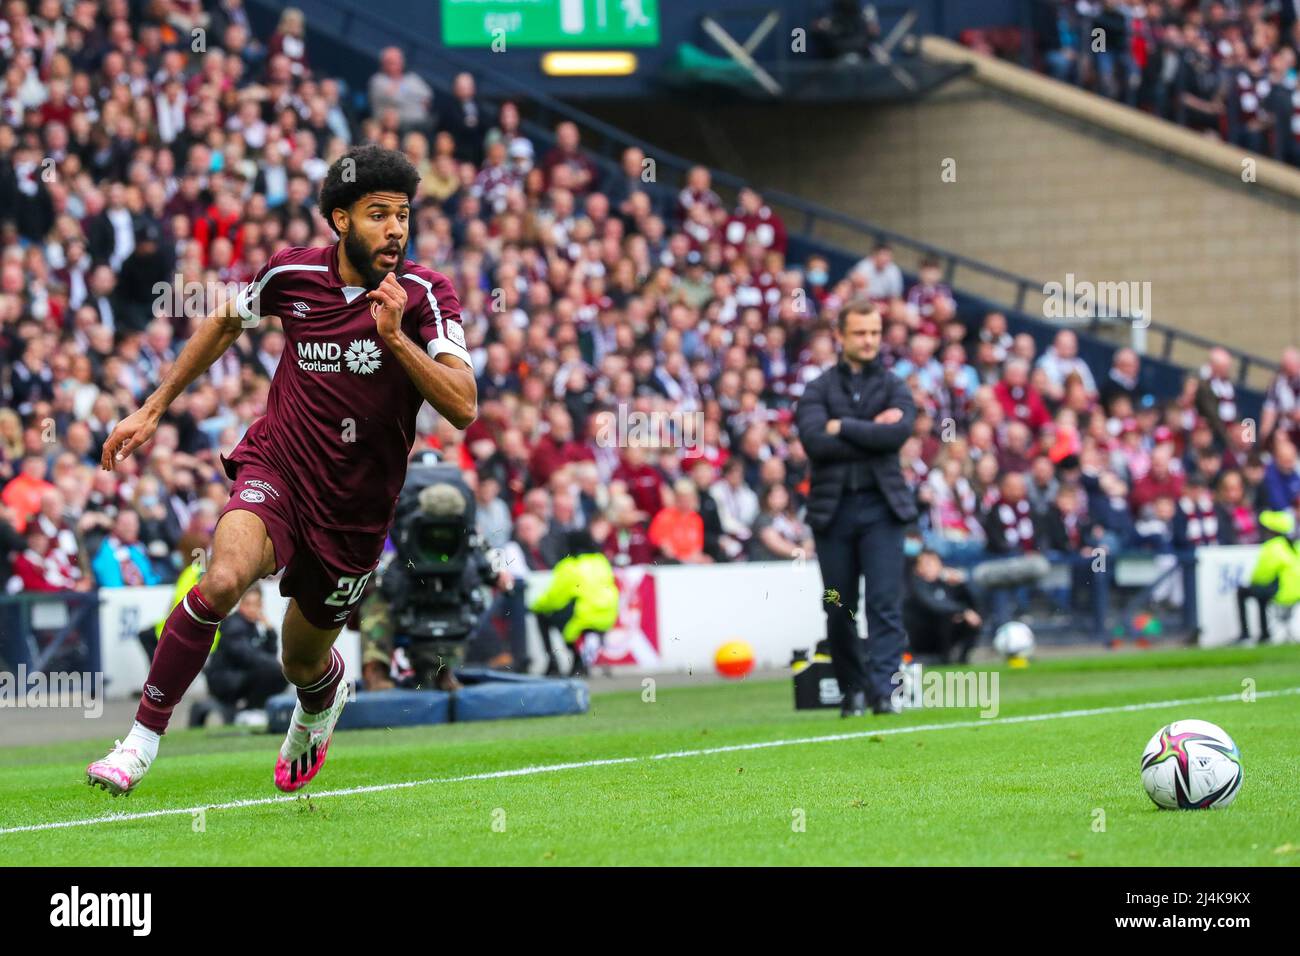 Glasgow, UK. 16th Apr, 2022. The Edinburgh derby teams of Hearts of Midlothian and Hibernian played in the William Hill Scottish Cup Semi-Final at Hampden Park, Glasgow, Scotland, UK. Credit: Findlay/Alamy Live News Stock Photo